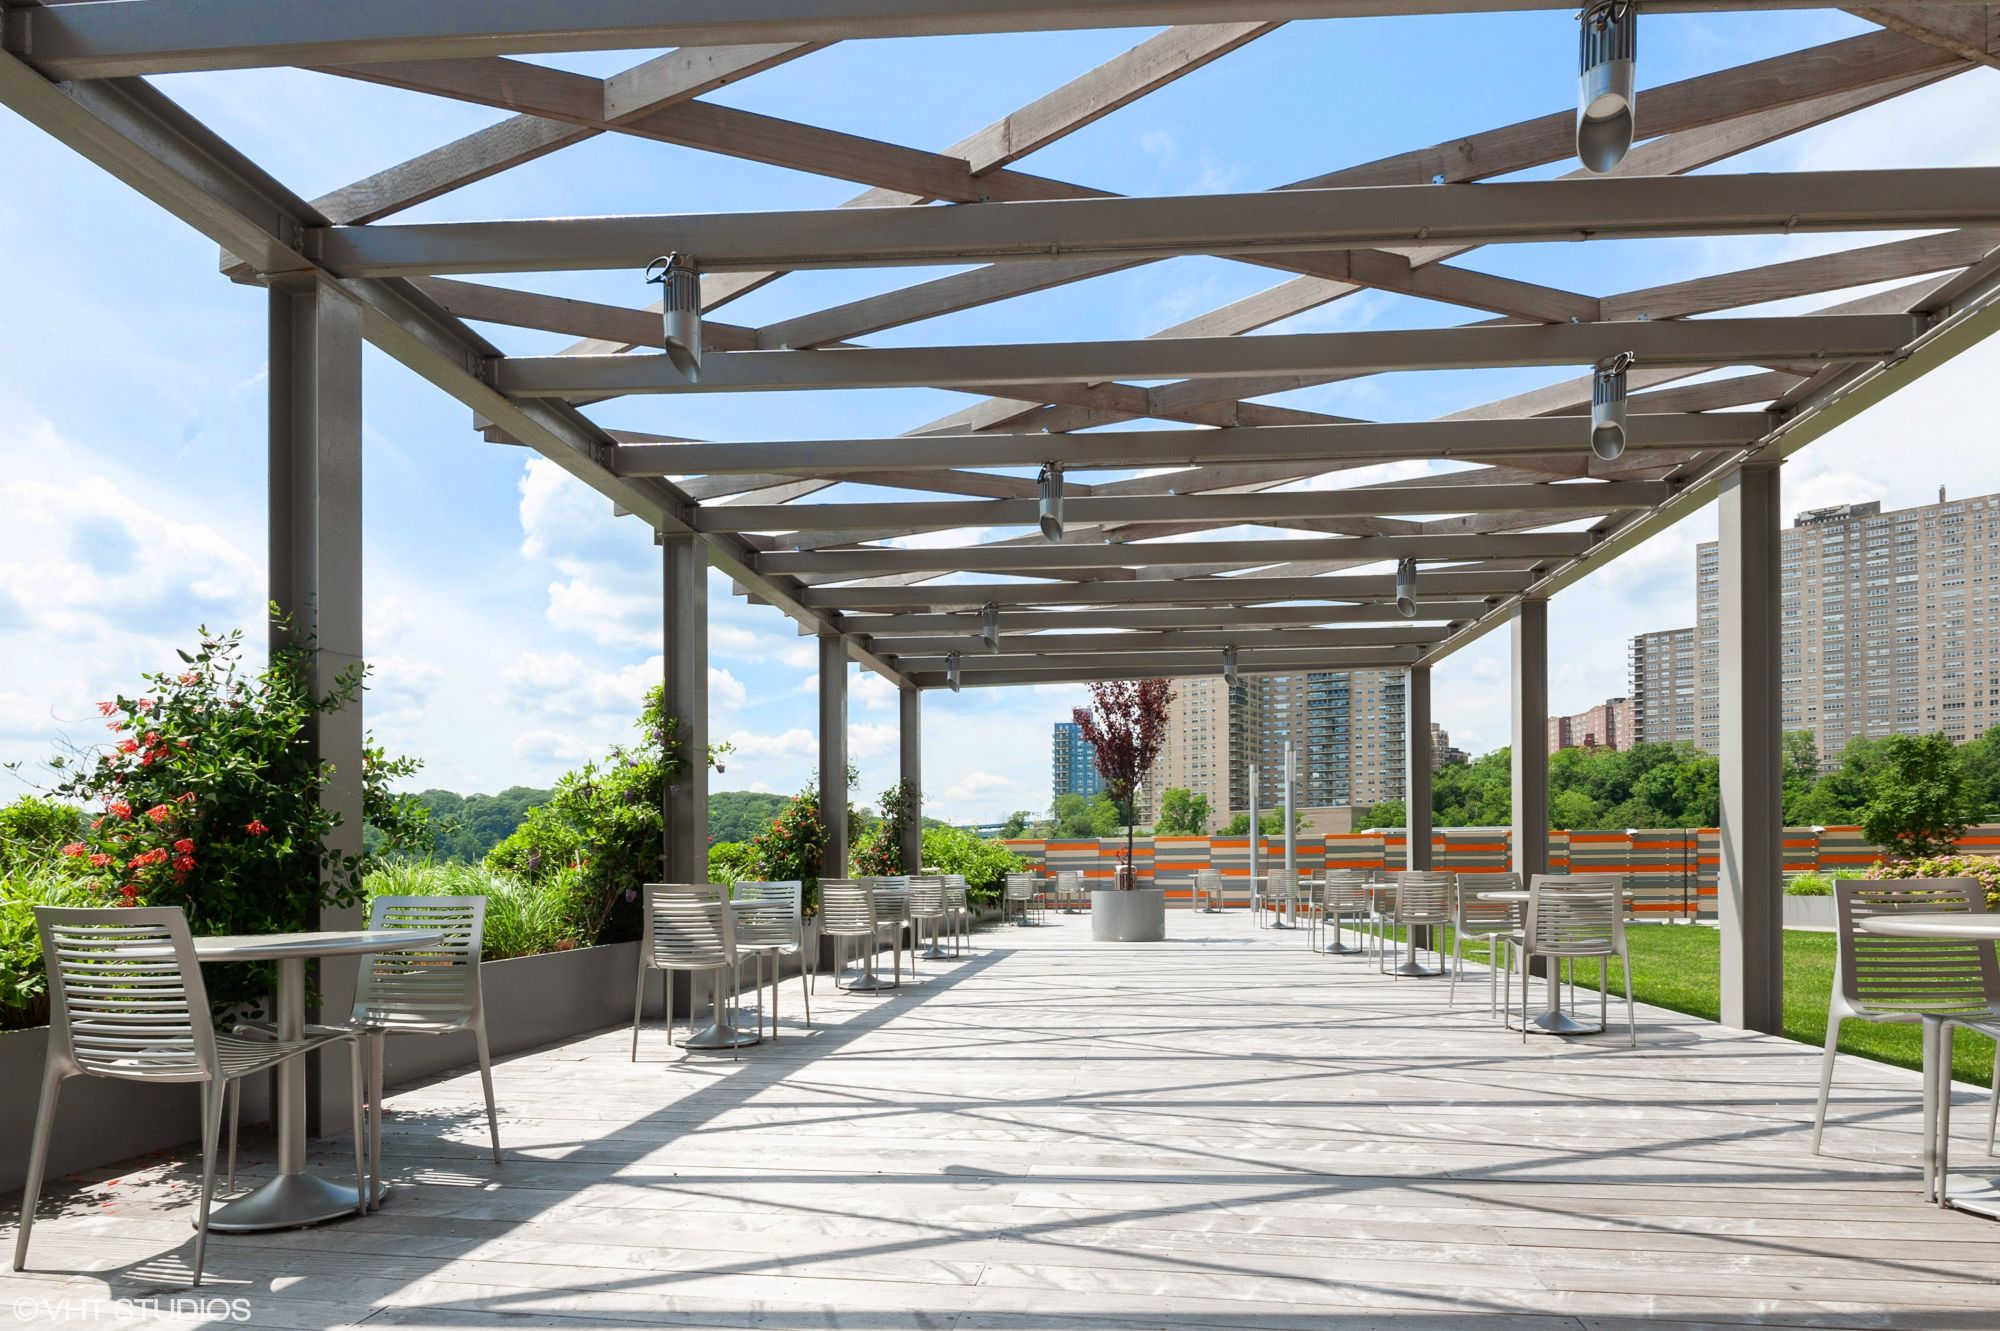 The Landscaped Garden Terrace at The Promenade, 150 west 225th street, is Furnished with modern tables & chairs under a pergola.